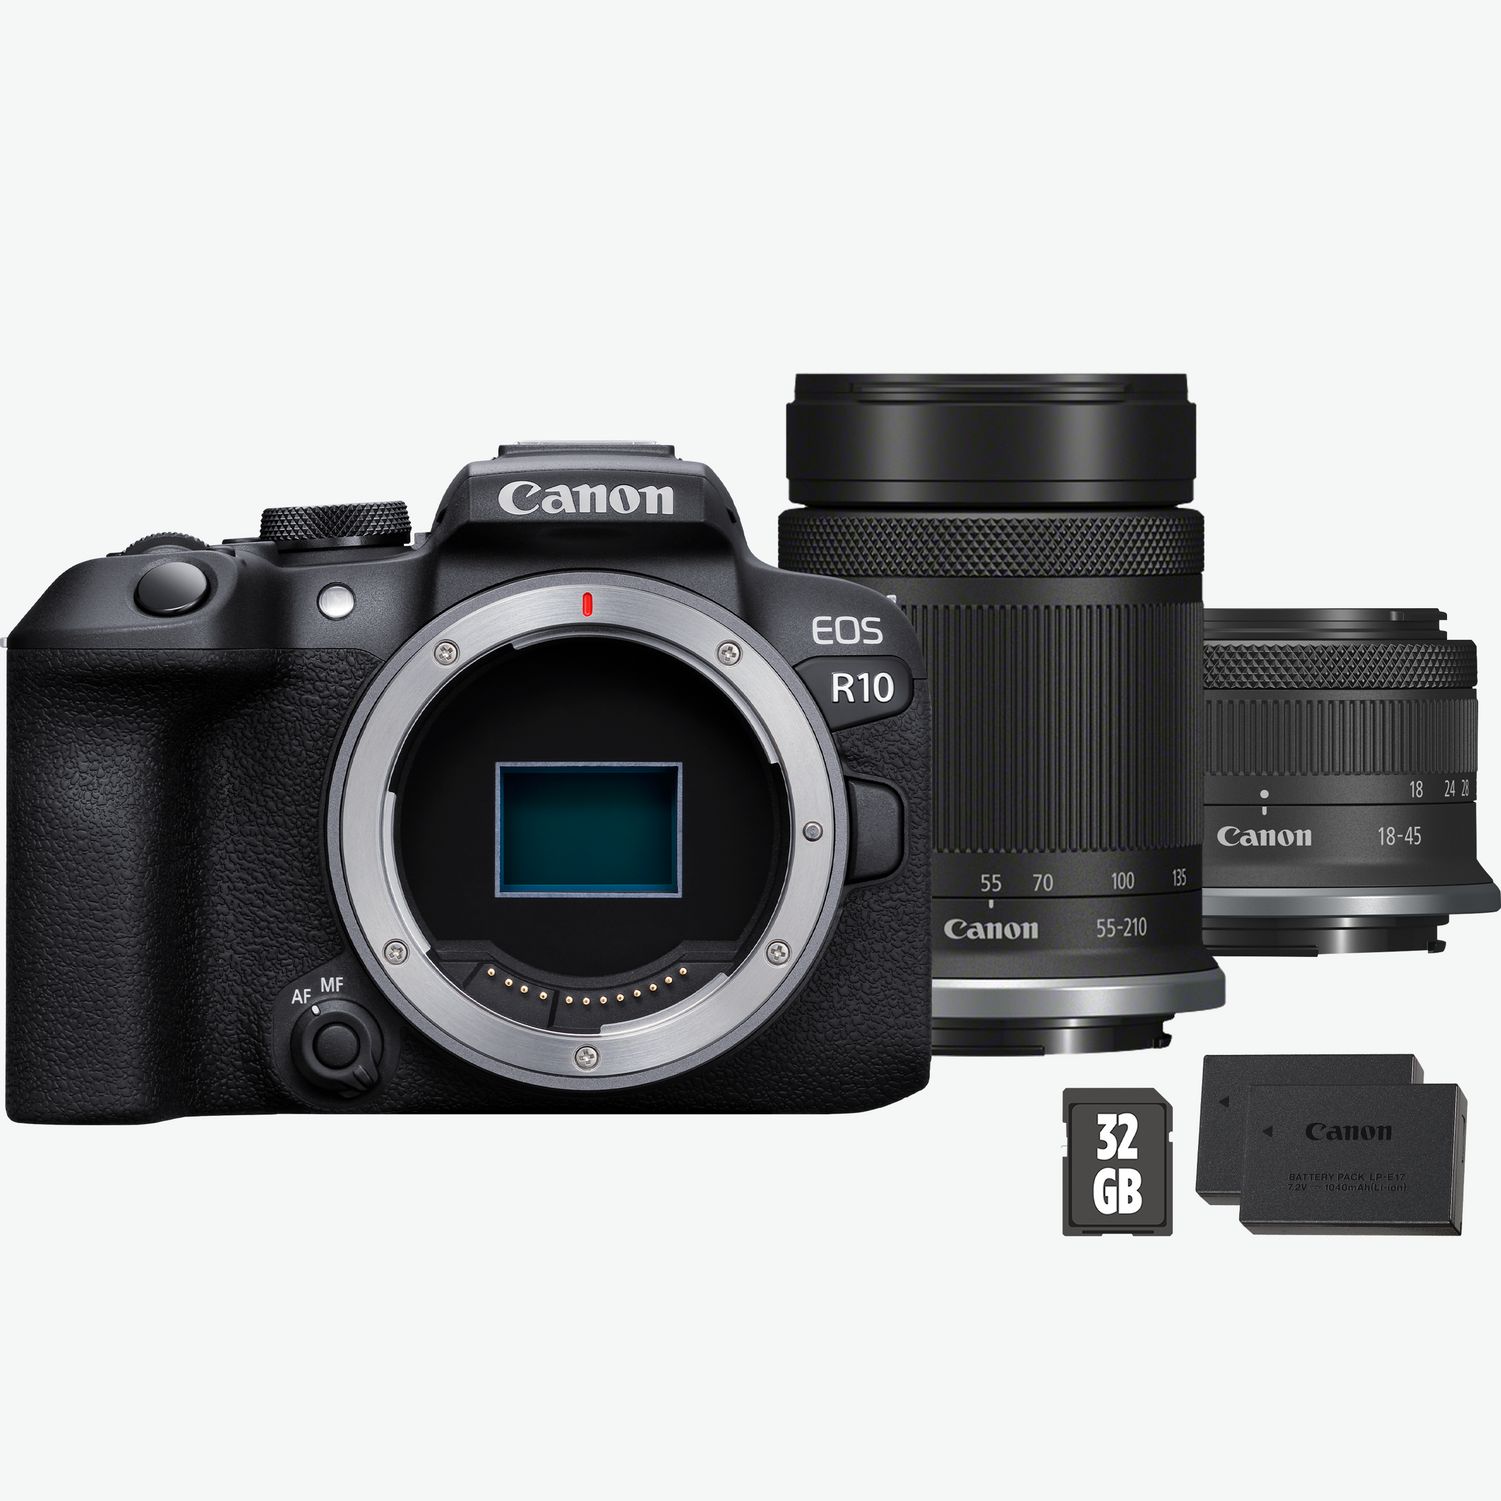 EOS Store Canon Canon Norge Discontinued Body Buy Black - in M100 —